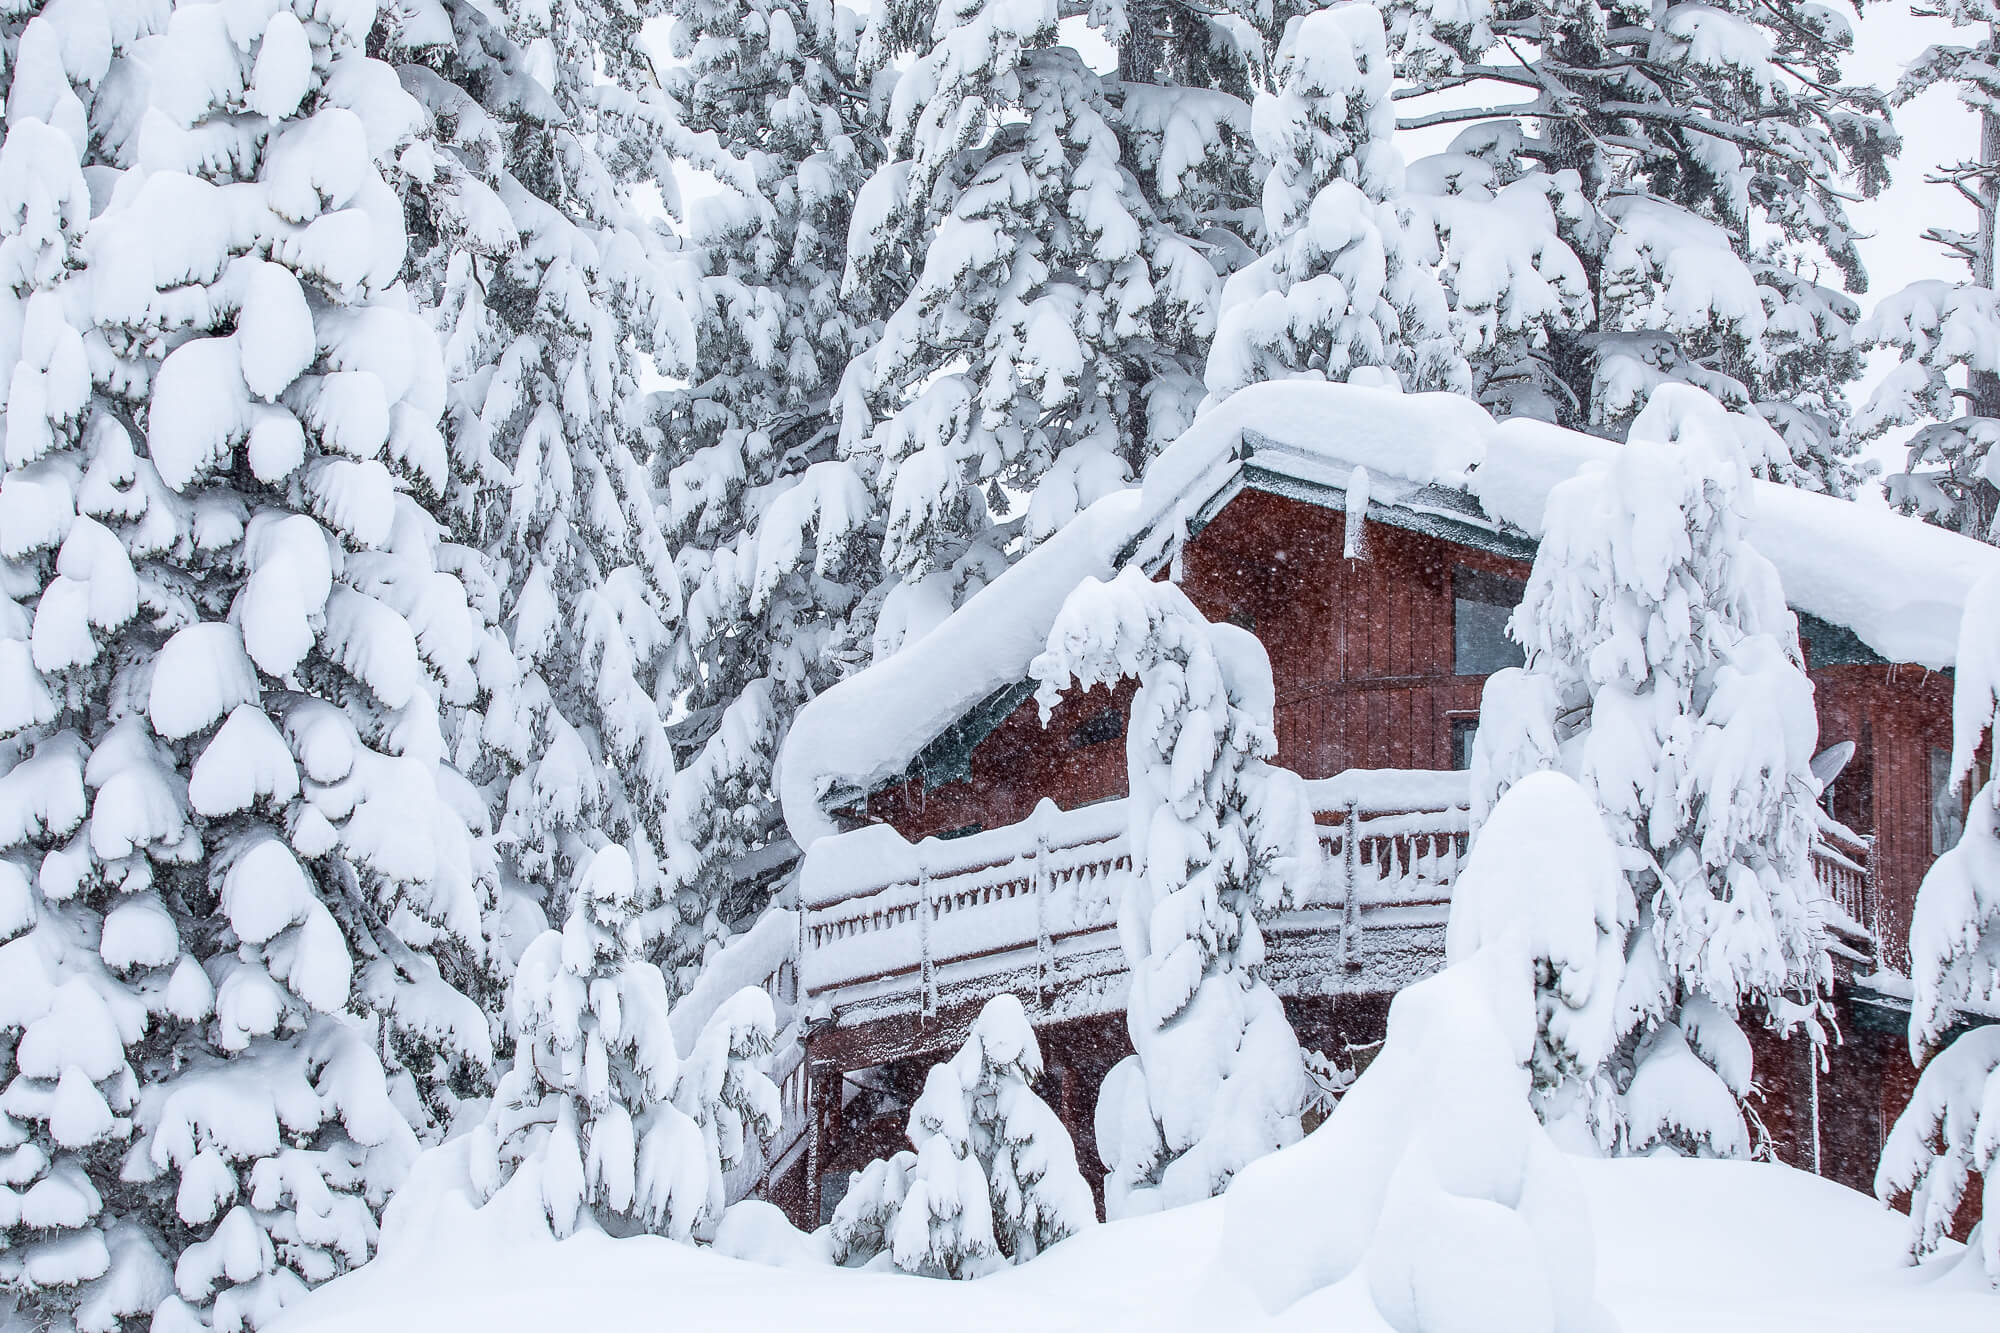 A snow-covered house in Mammoth Lakes surrounded by snow-covered pine trees